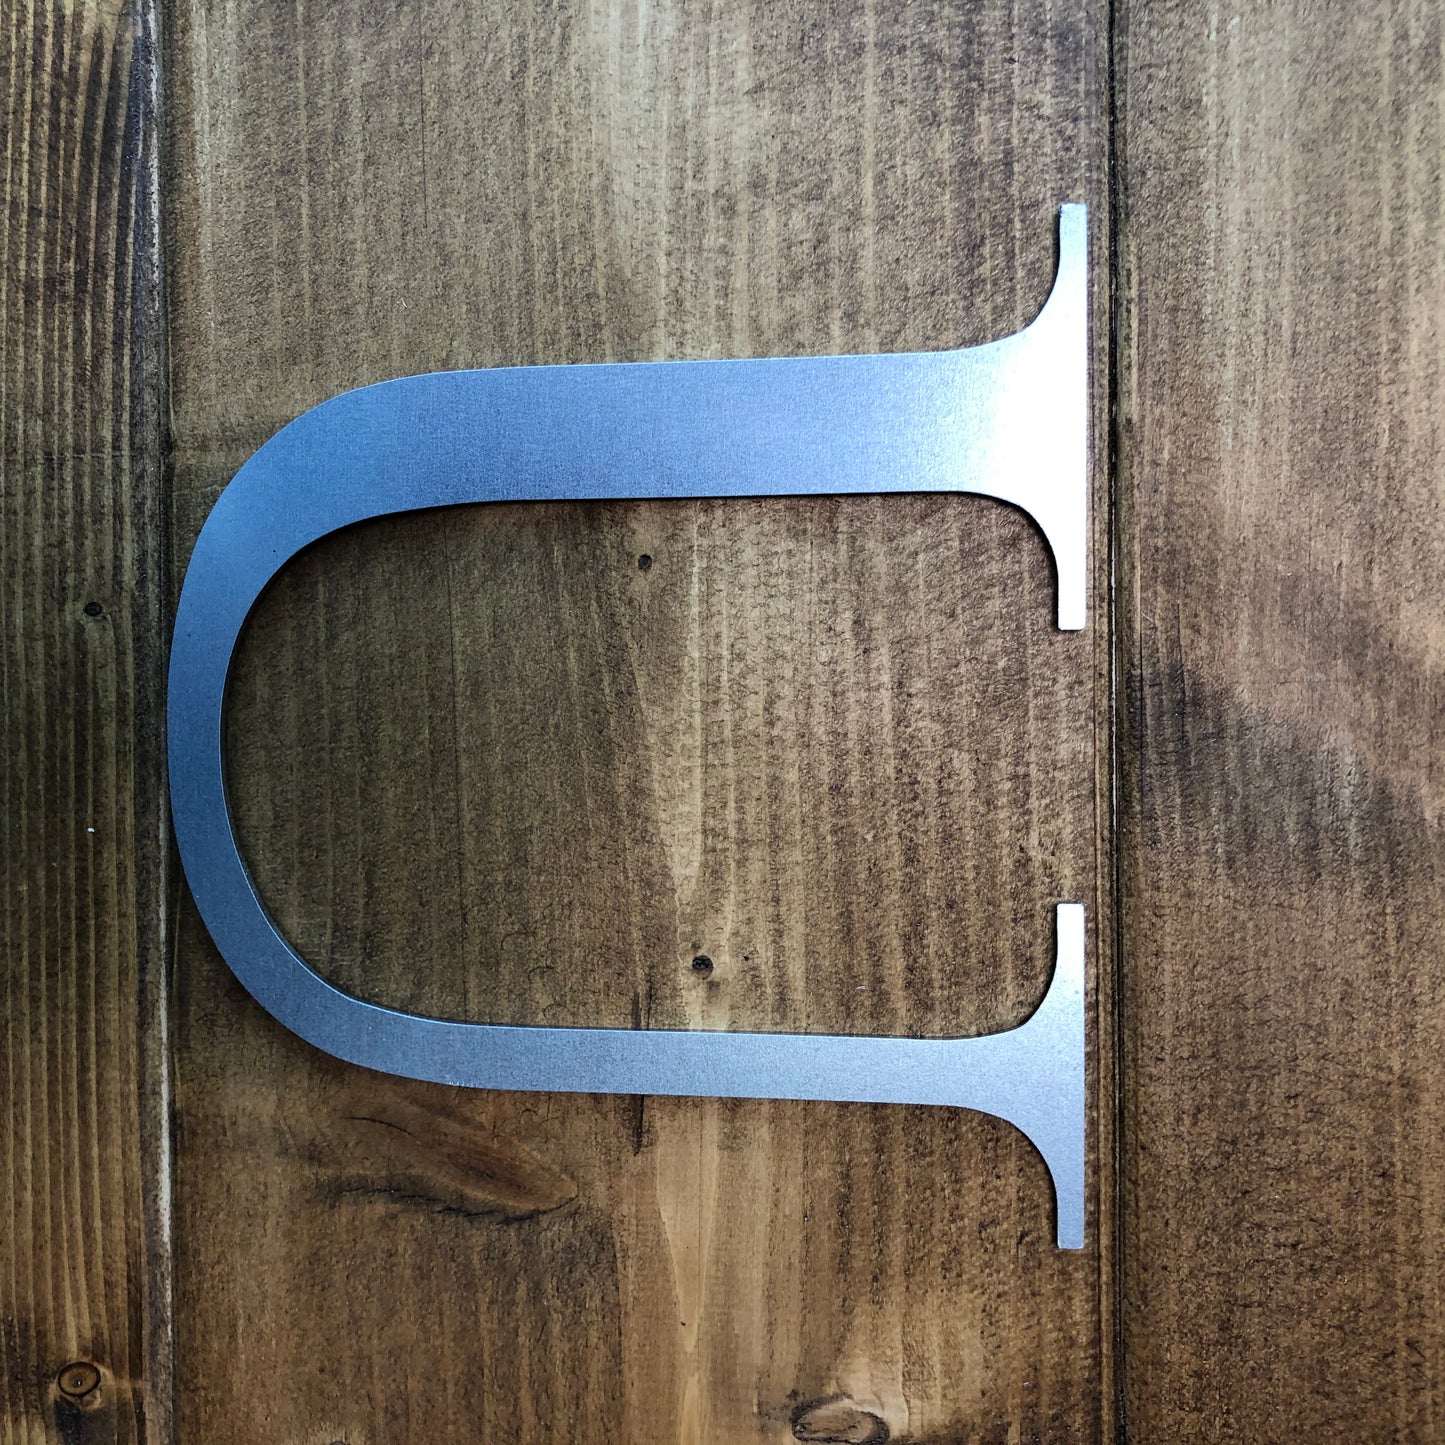 5" Galvanized Steel Classic Letters A-Z 0-9